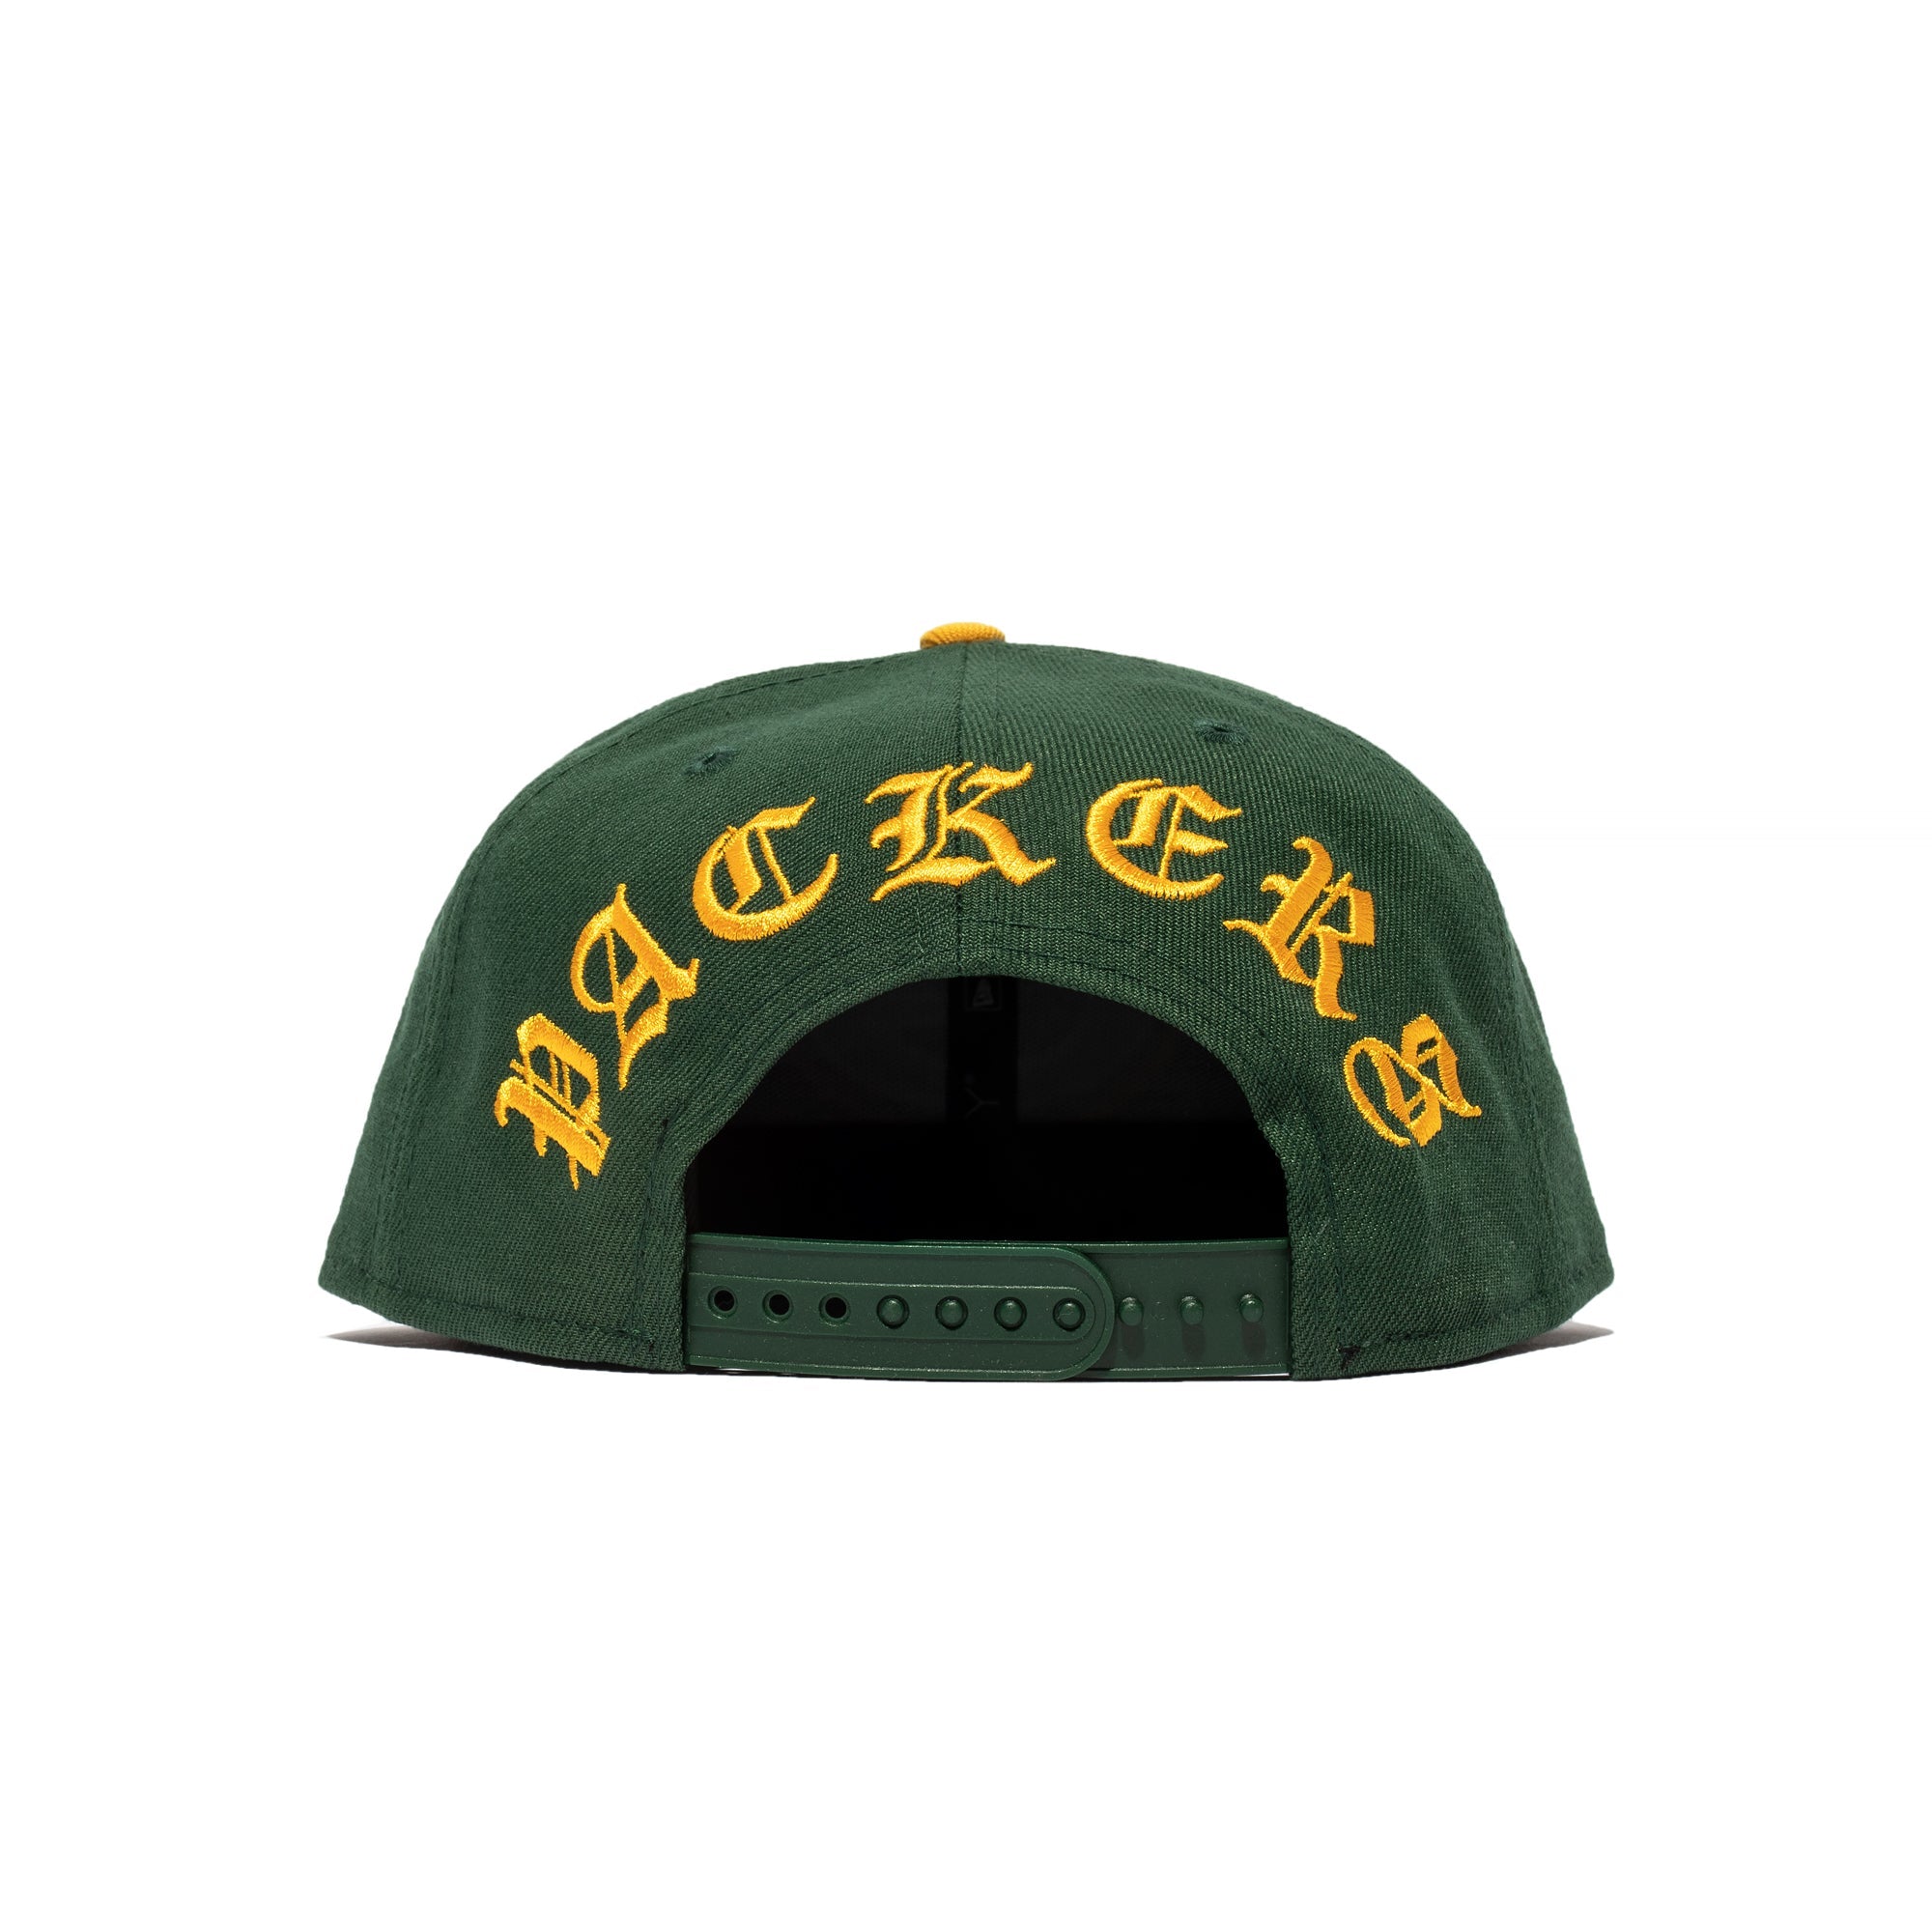 New Era Backletter Arch 9FIFTY Greenbay Packers Snapback Hat